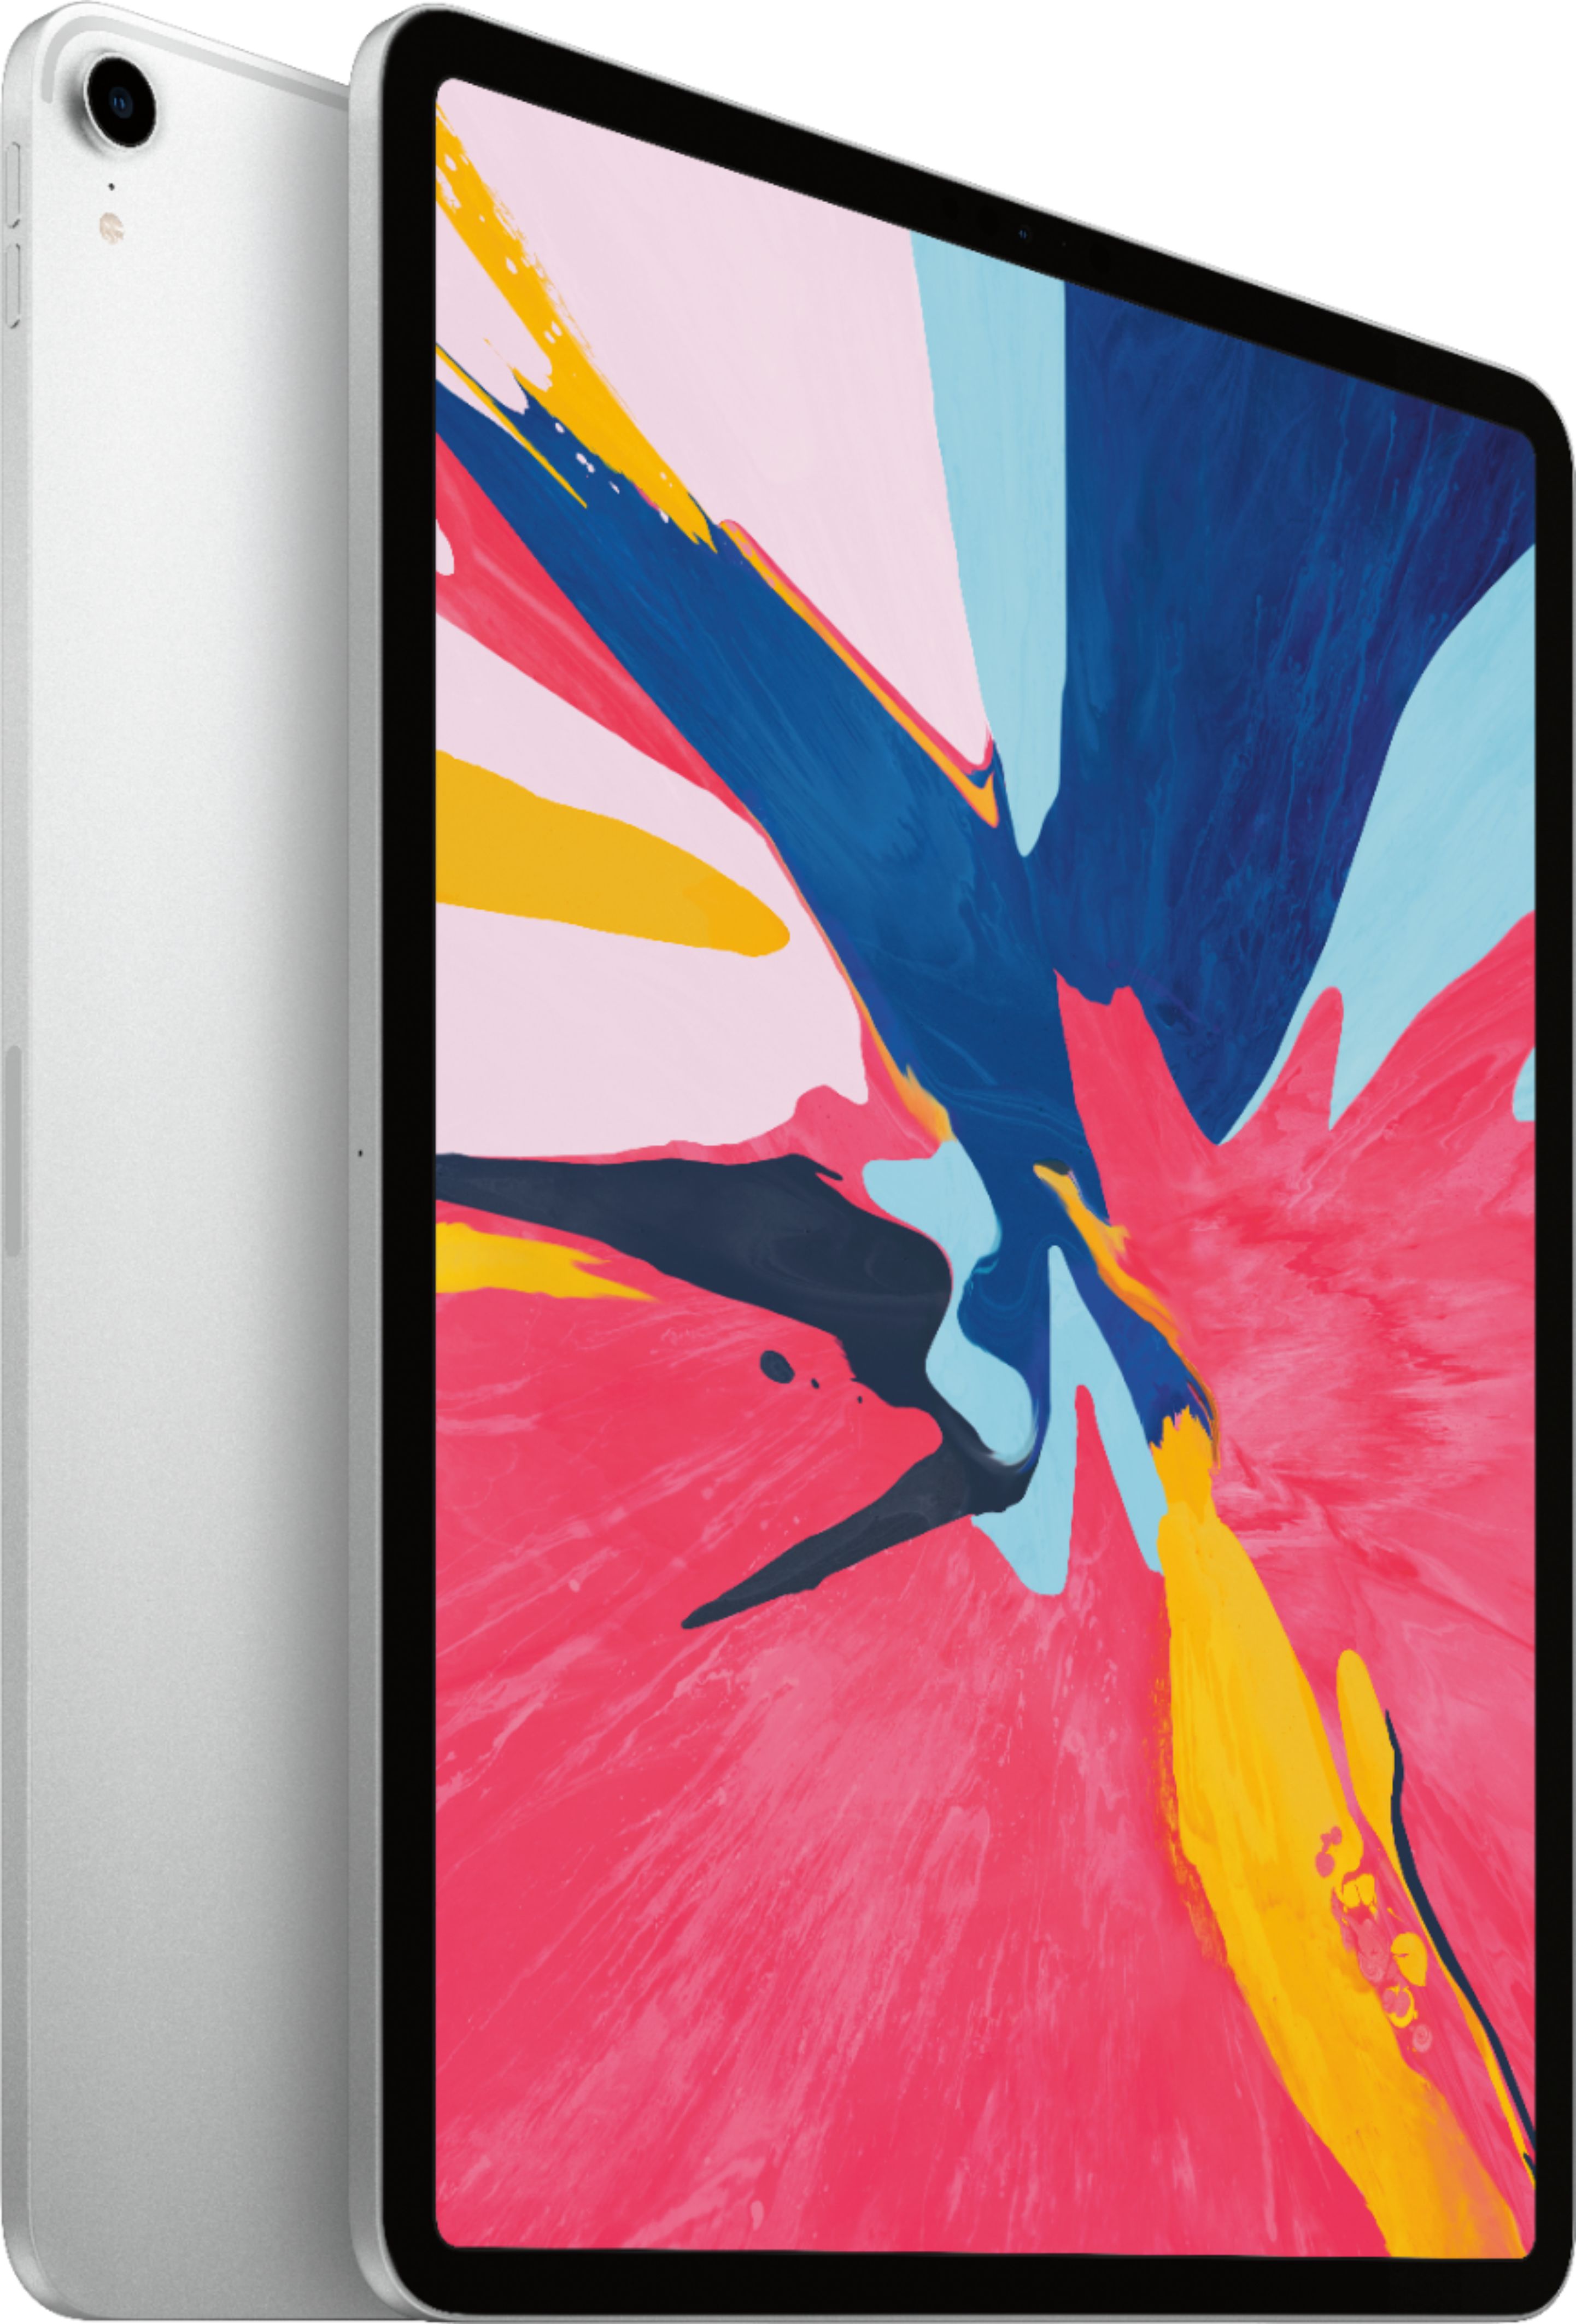 Angle View: Apple - Geek Squad Certified Refurbished 12.9-Inch iPad Pro (Latest Model) with Wi-Fi - 512GB - Silver